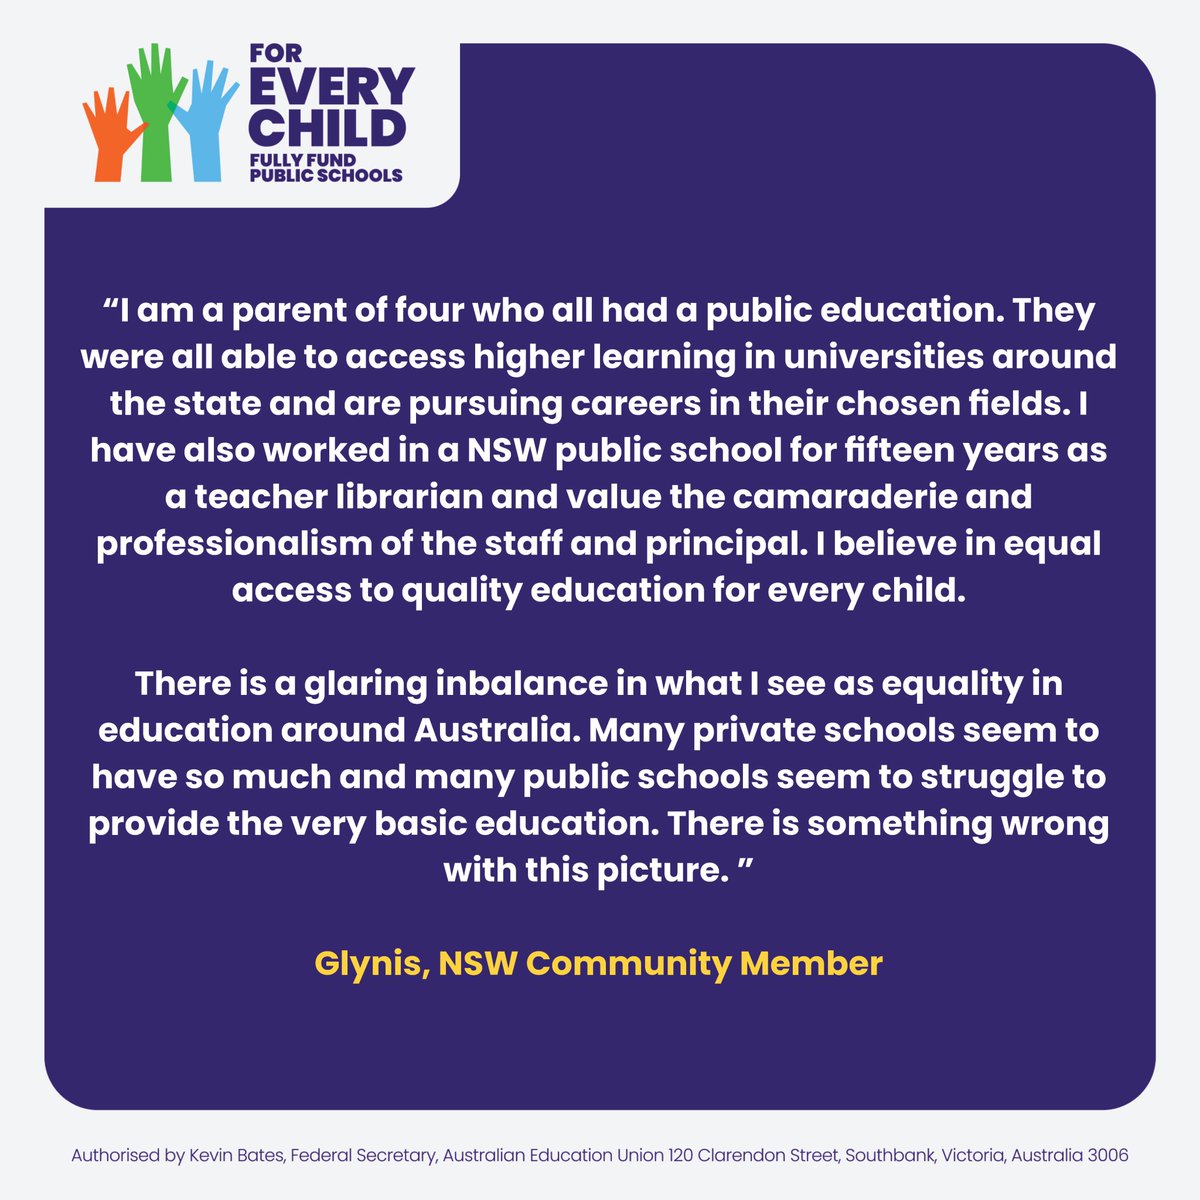 Principals & teachers are delivering a great education for our kids in public schools, but they are being asked to do too much with too little. @AlboMP if govts can afford to overfund private schools by billions of dollars, we can afford to fully fund public schools. #auspol